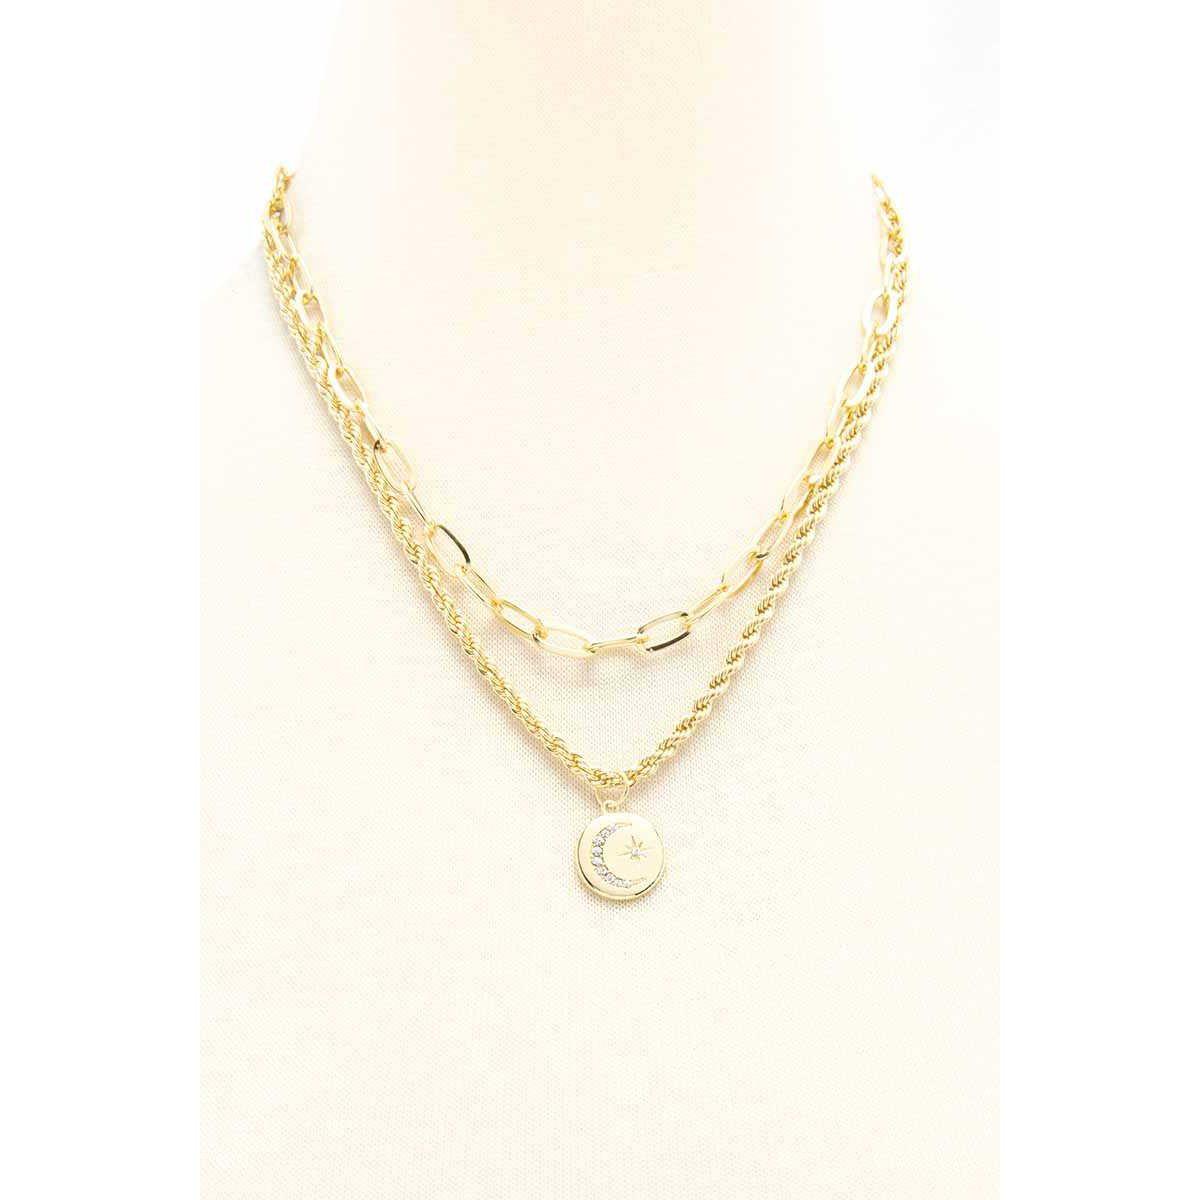 2 Layered Metal Chain Round Pendant Necklace-Necklace-NXTLVLNYC